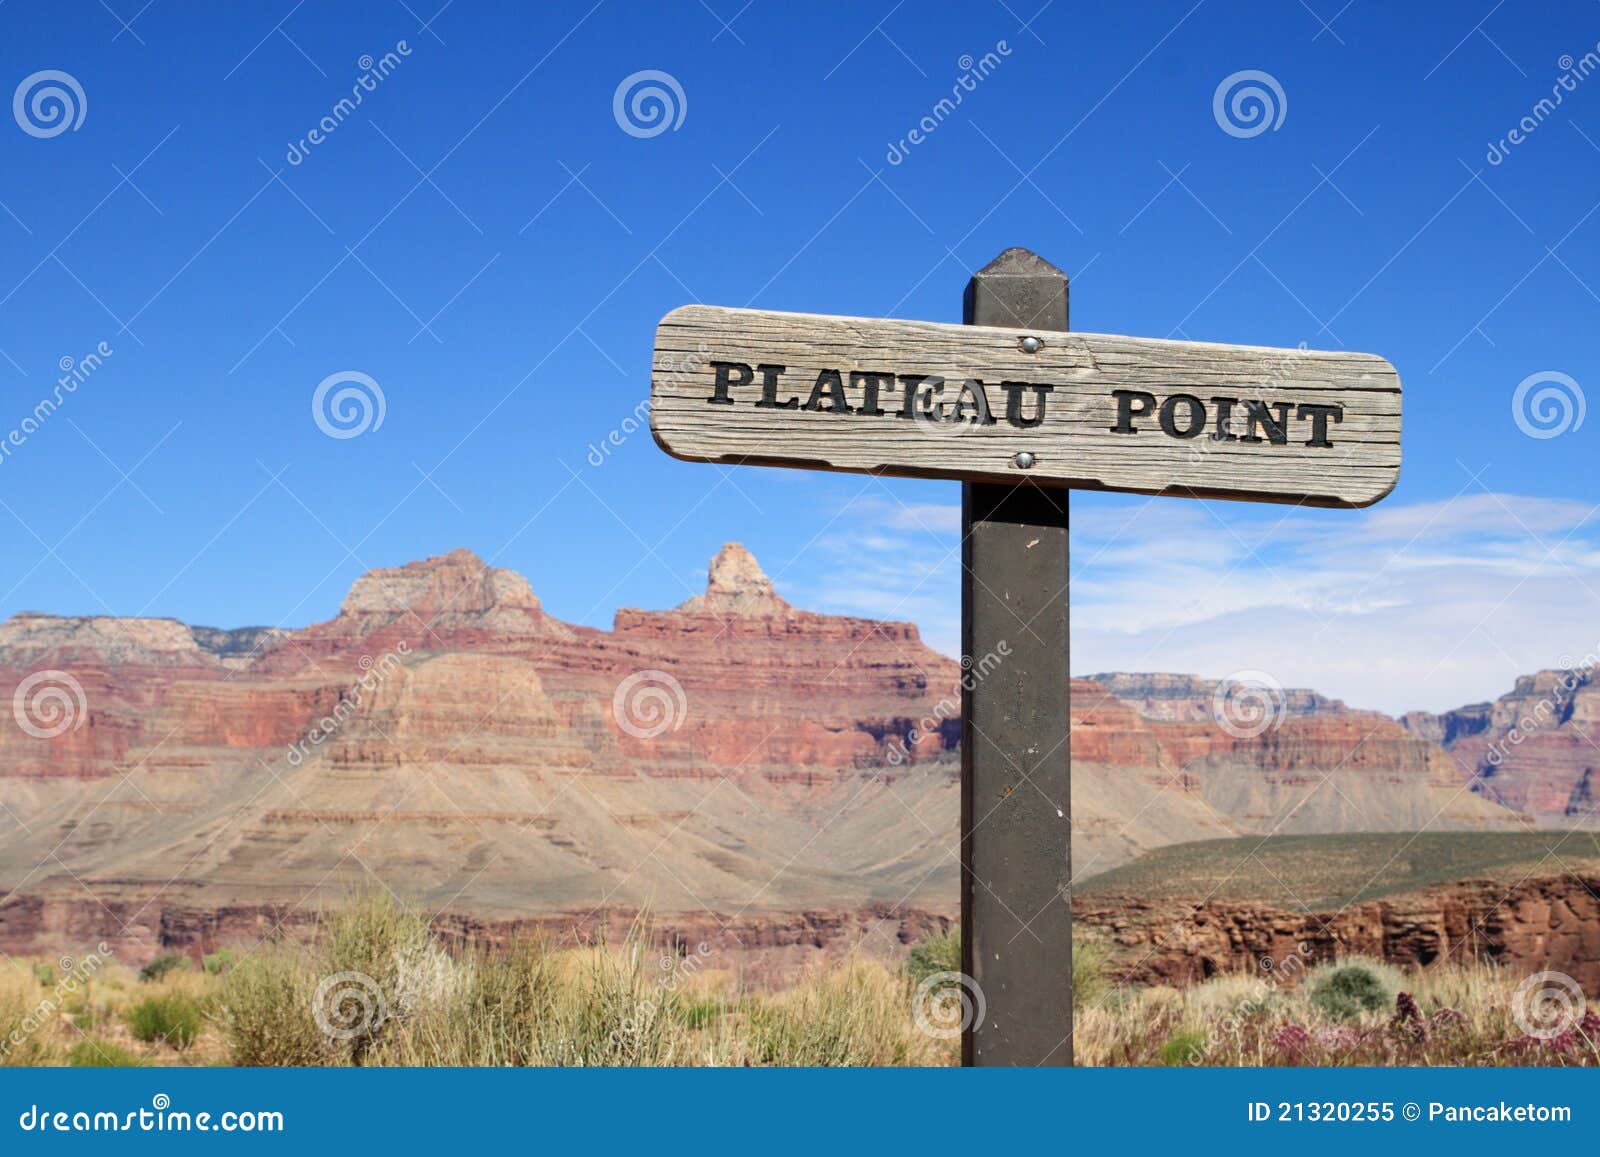 plateau point sign